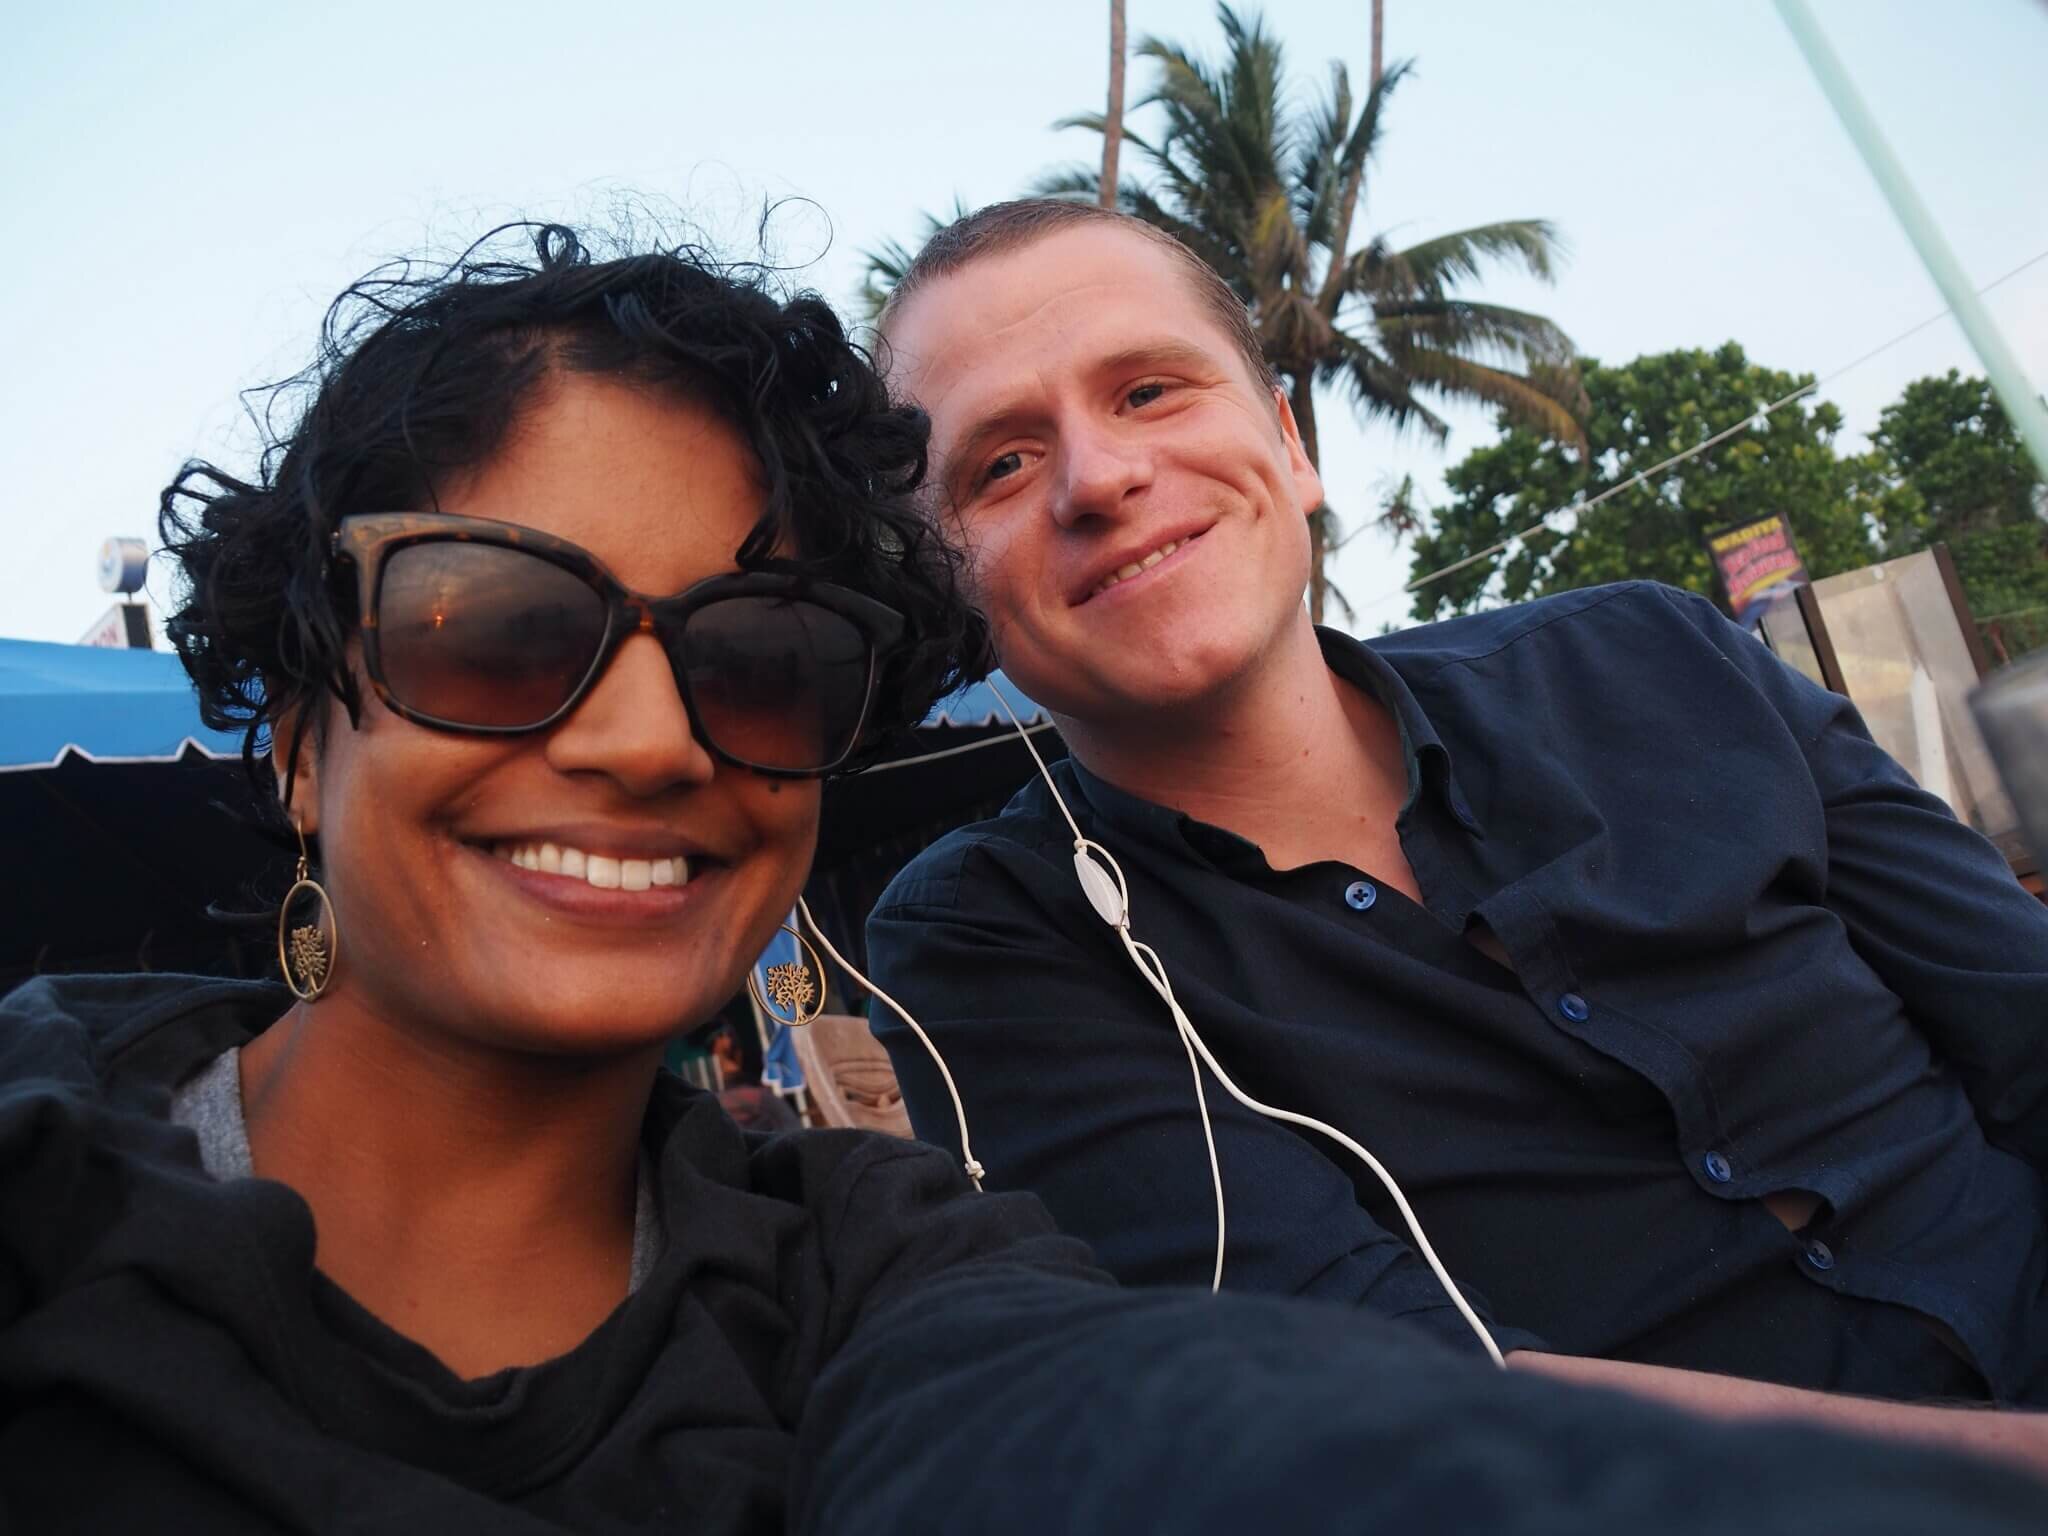  We had such fun in Sri Lanka! We can’t wait to go back! 